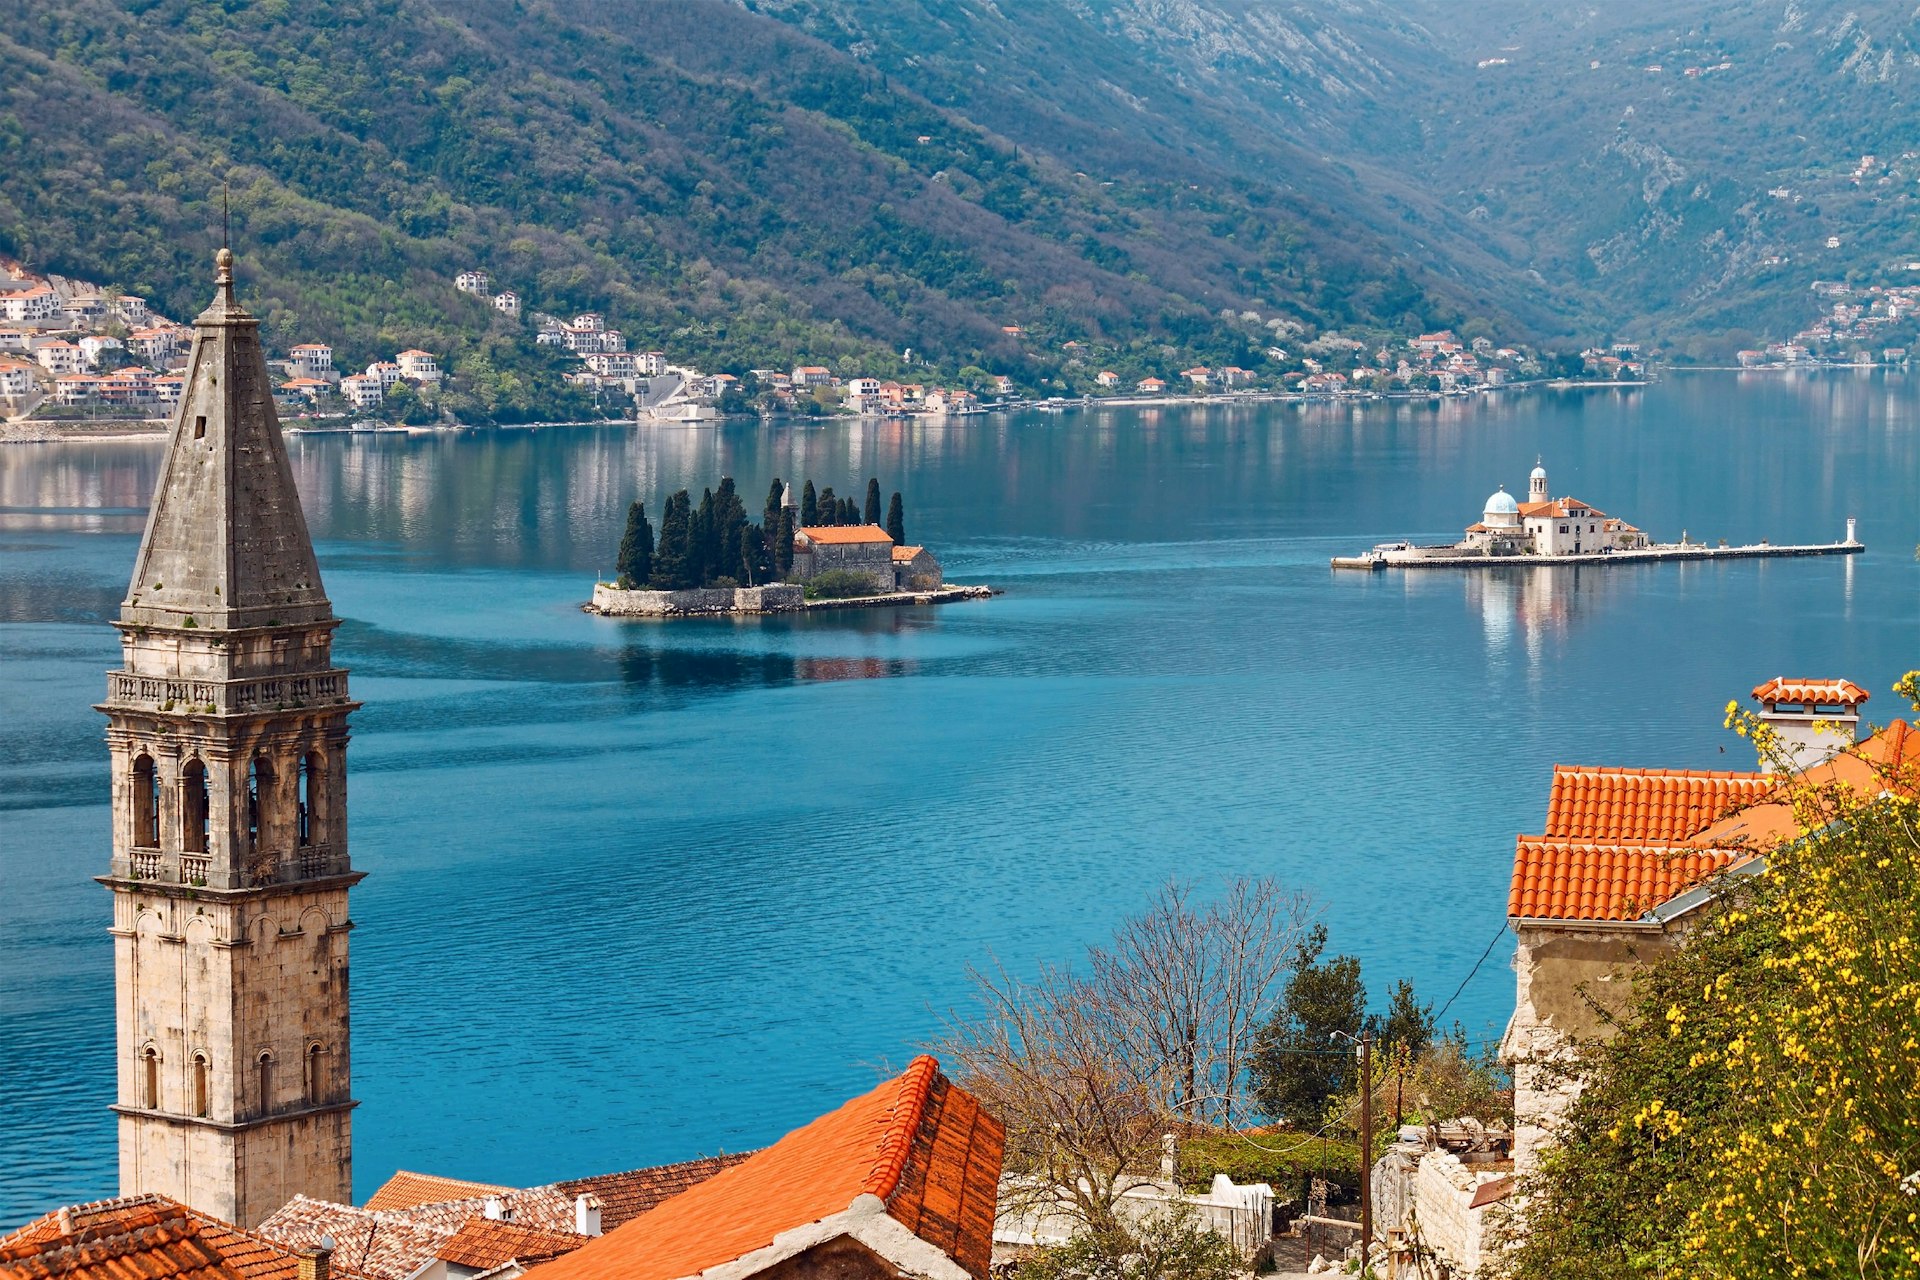 A view of the islets that lie within the Bay of Kotor.